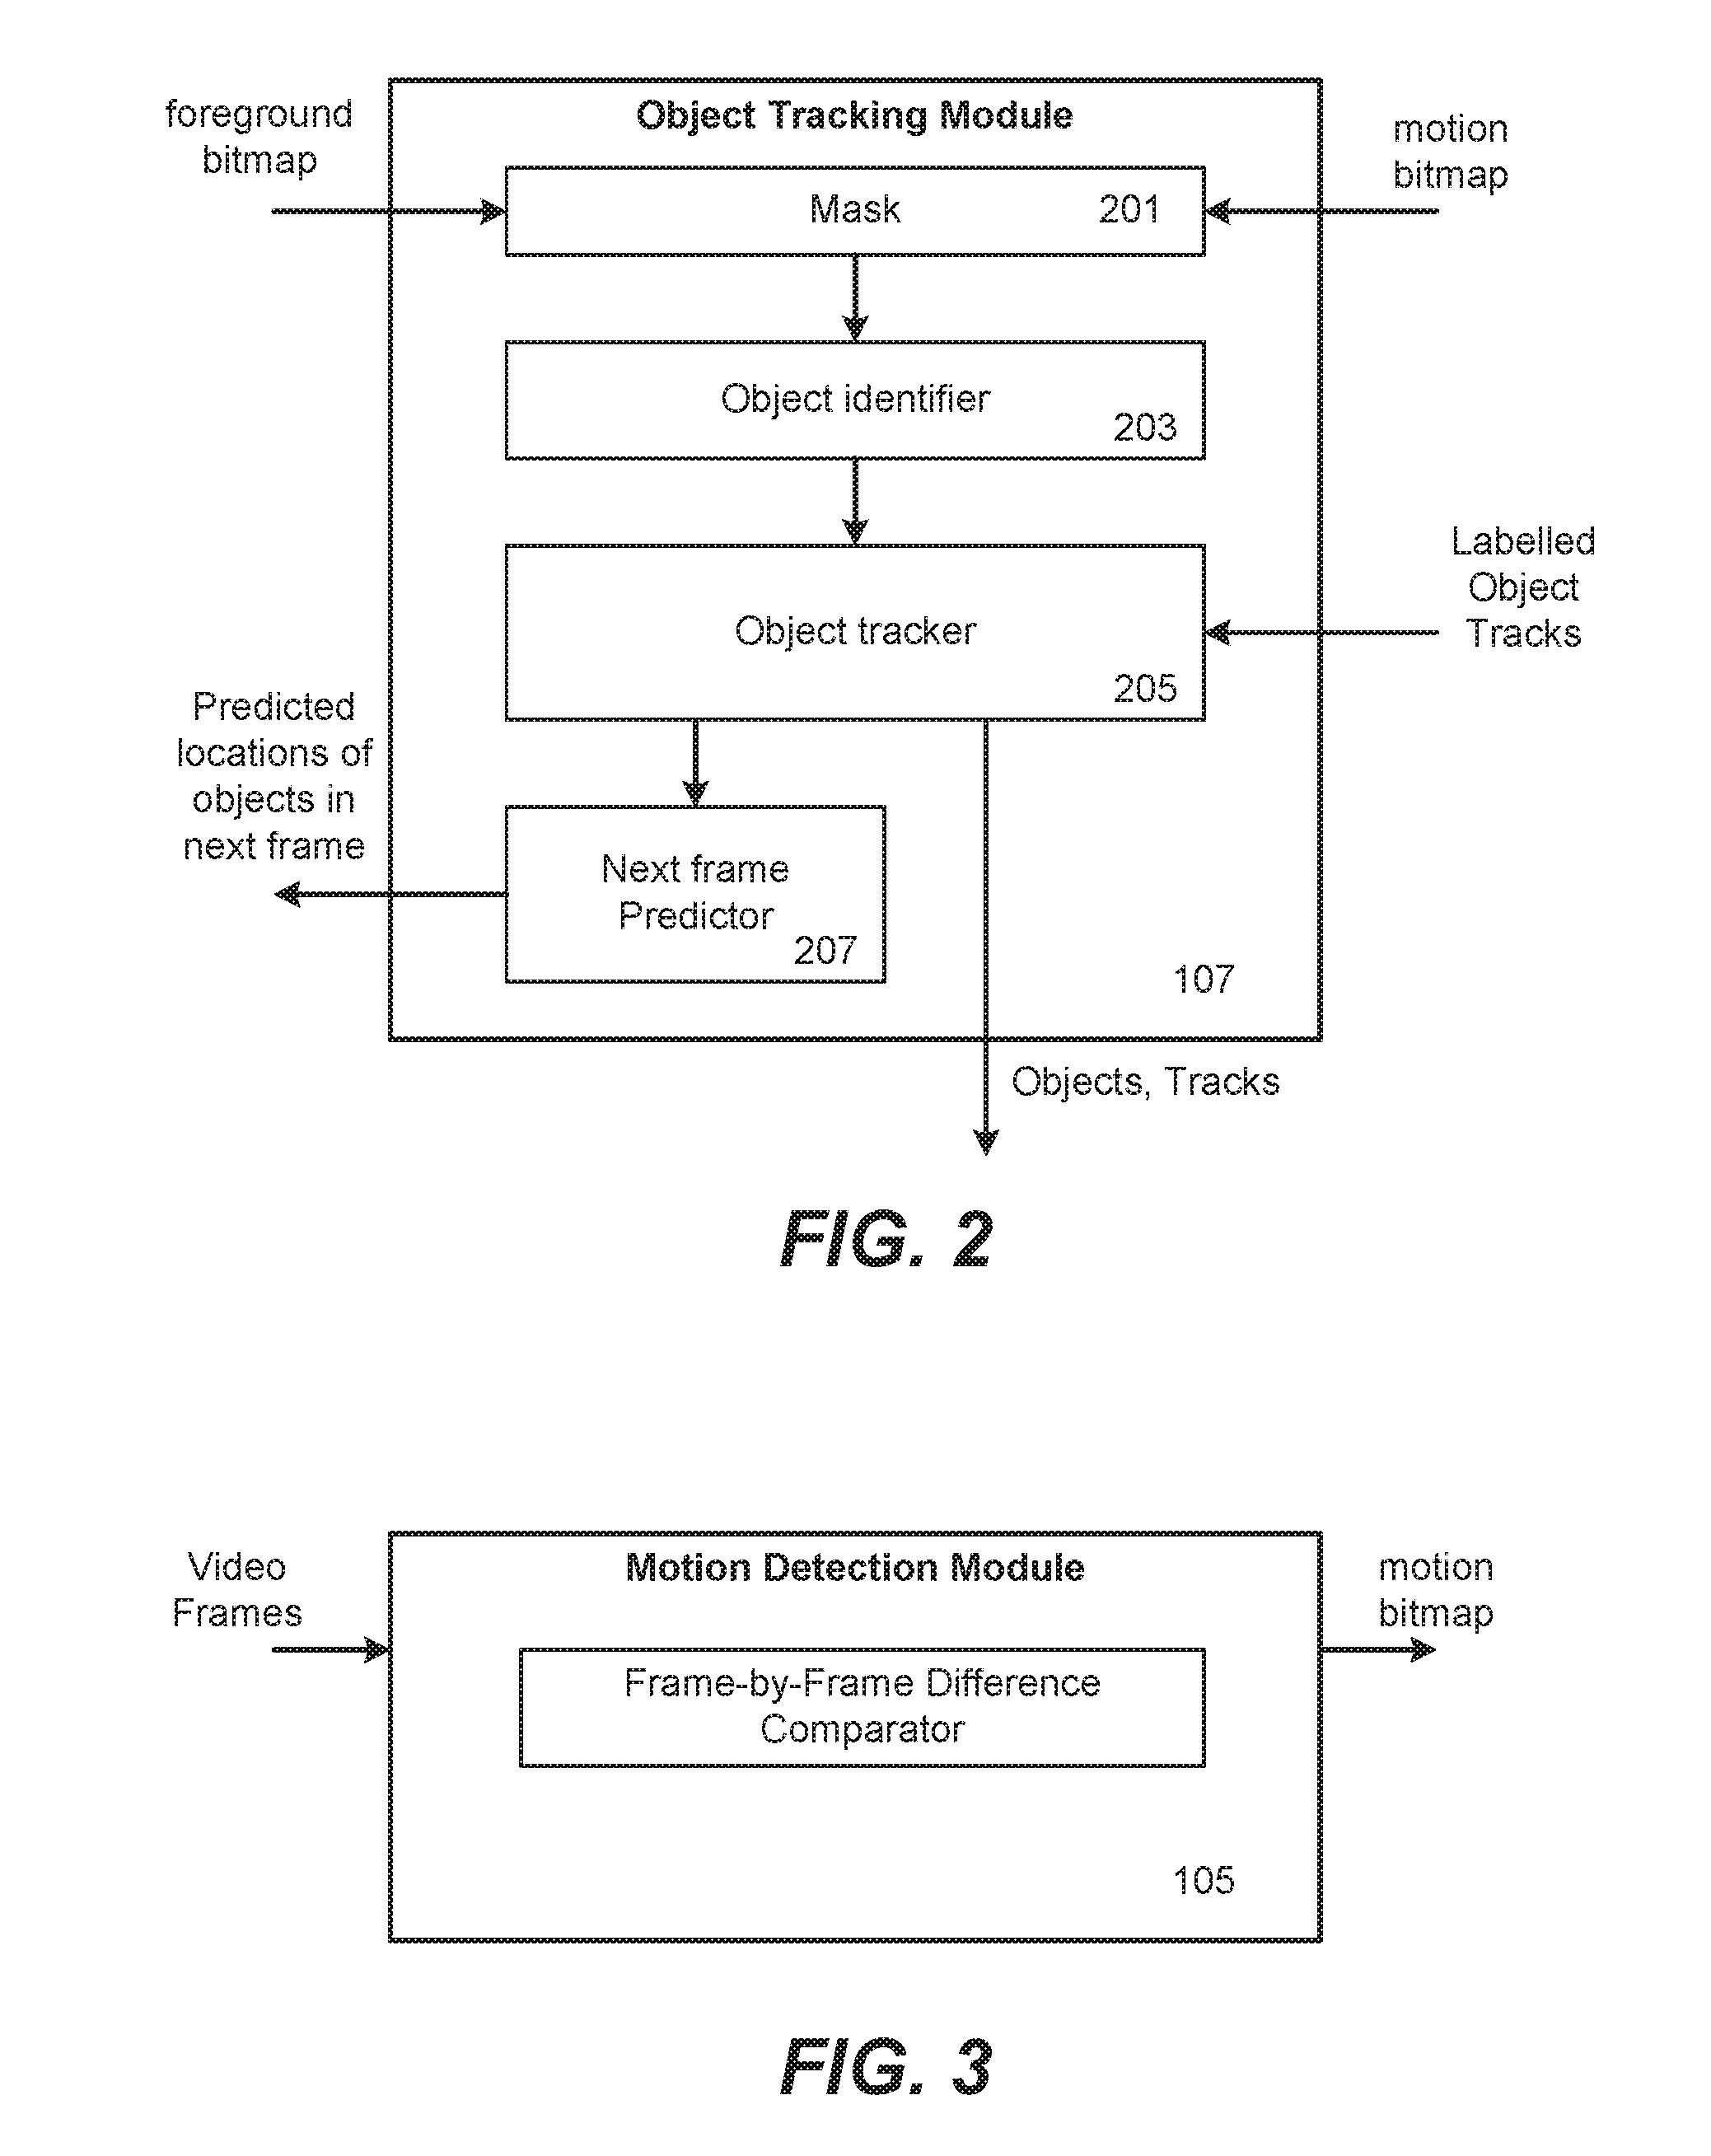 Computer Vision Pipeline and Methods for Detection of Specified Moving Objects